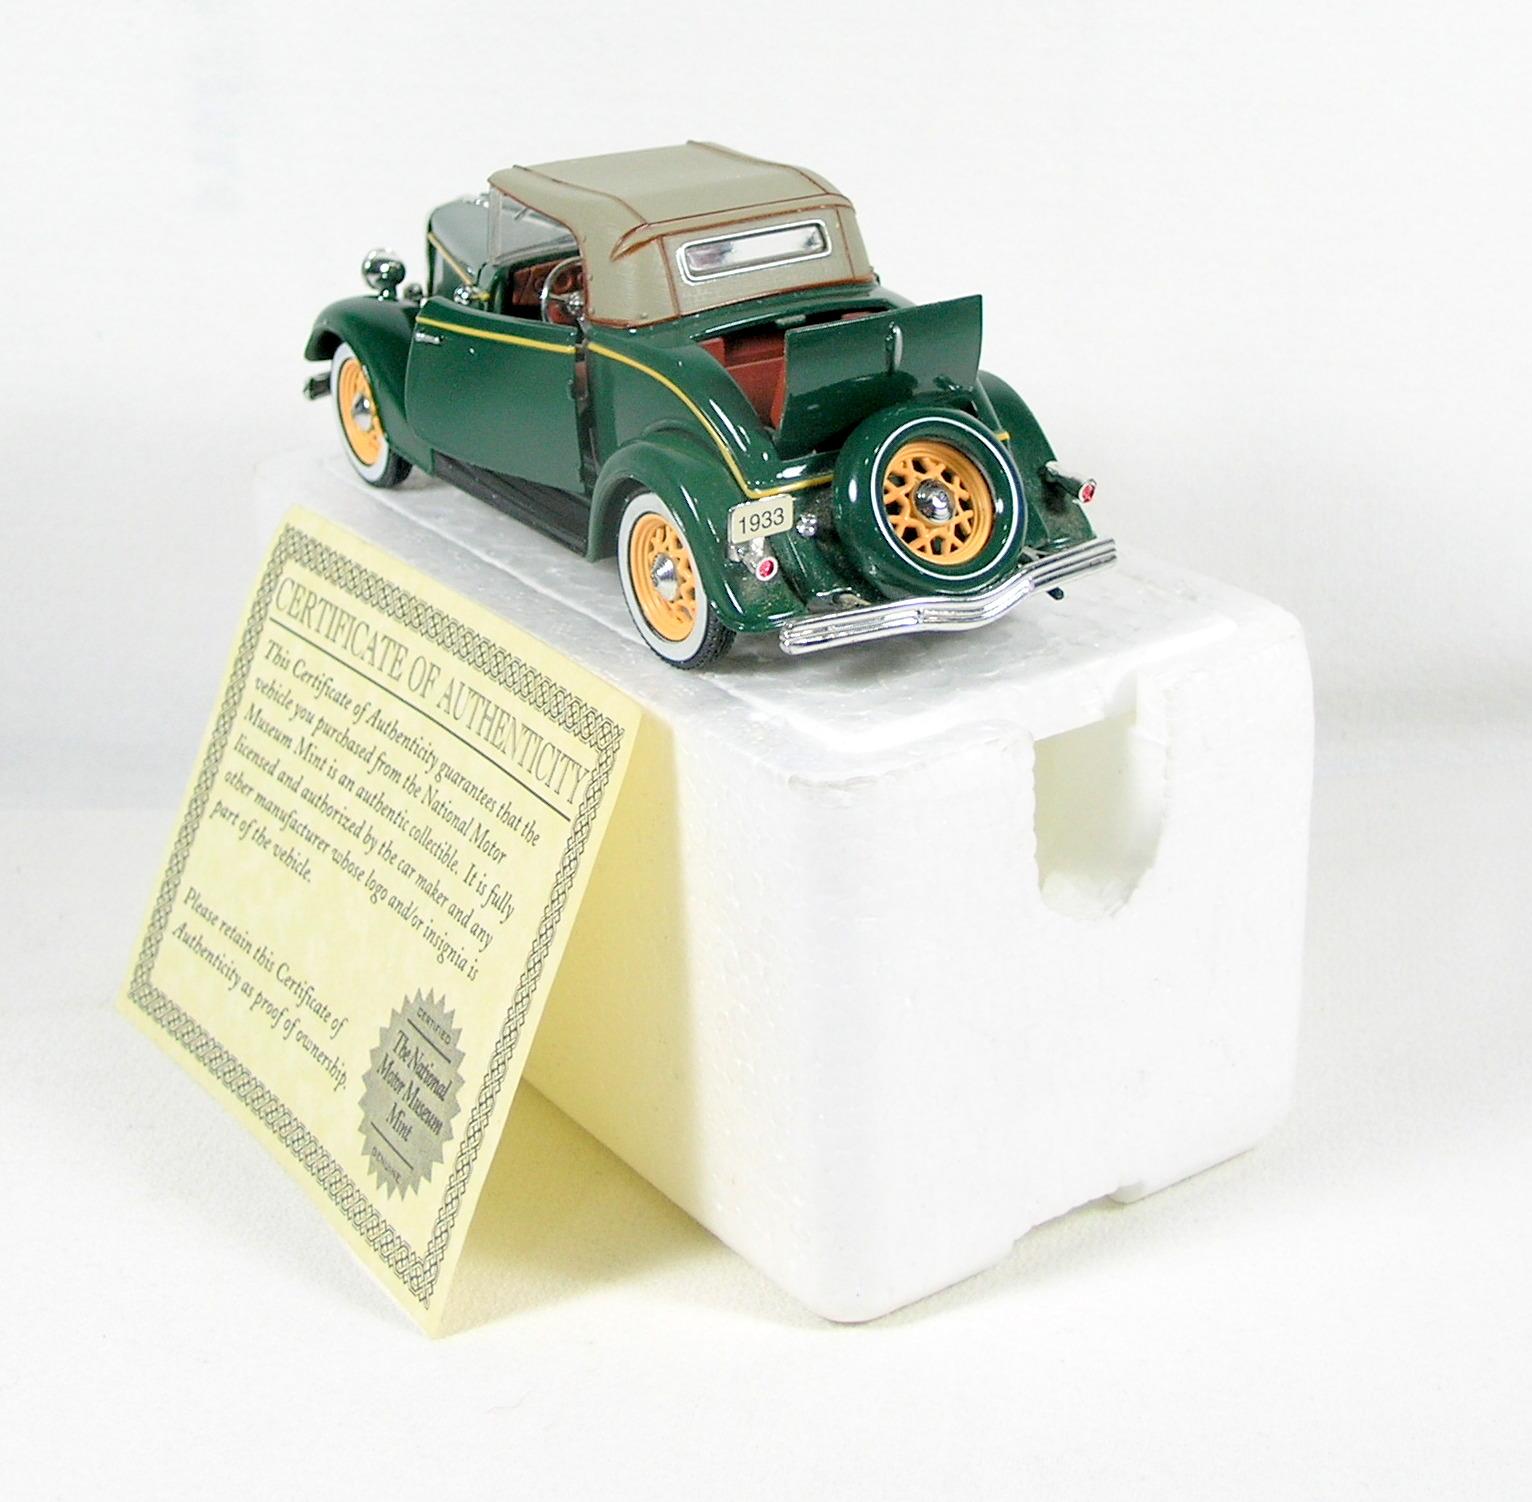 Diecast Replica of 1933 Ford  Deluxe Roadster From National Motor Museum Mi